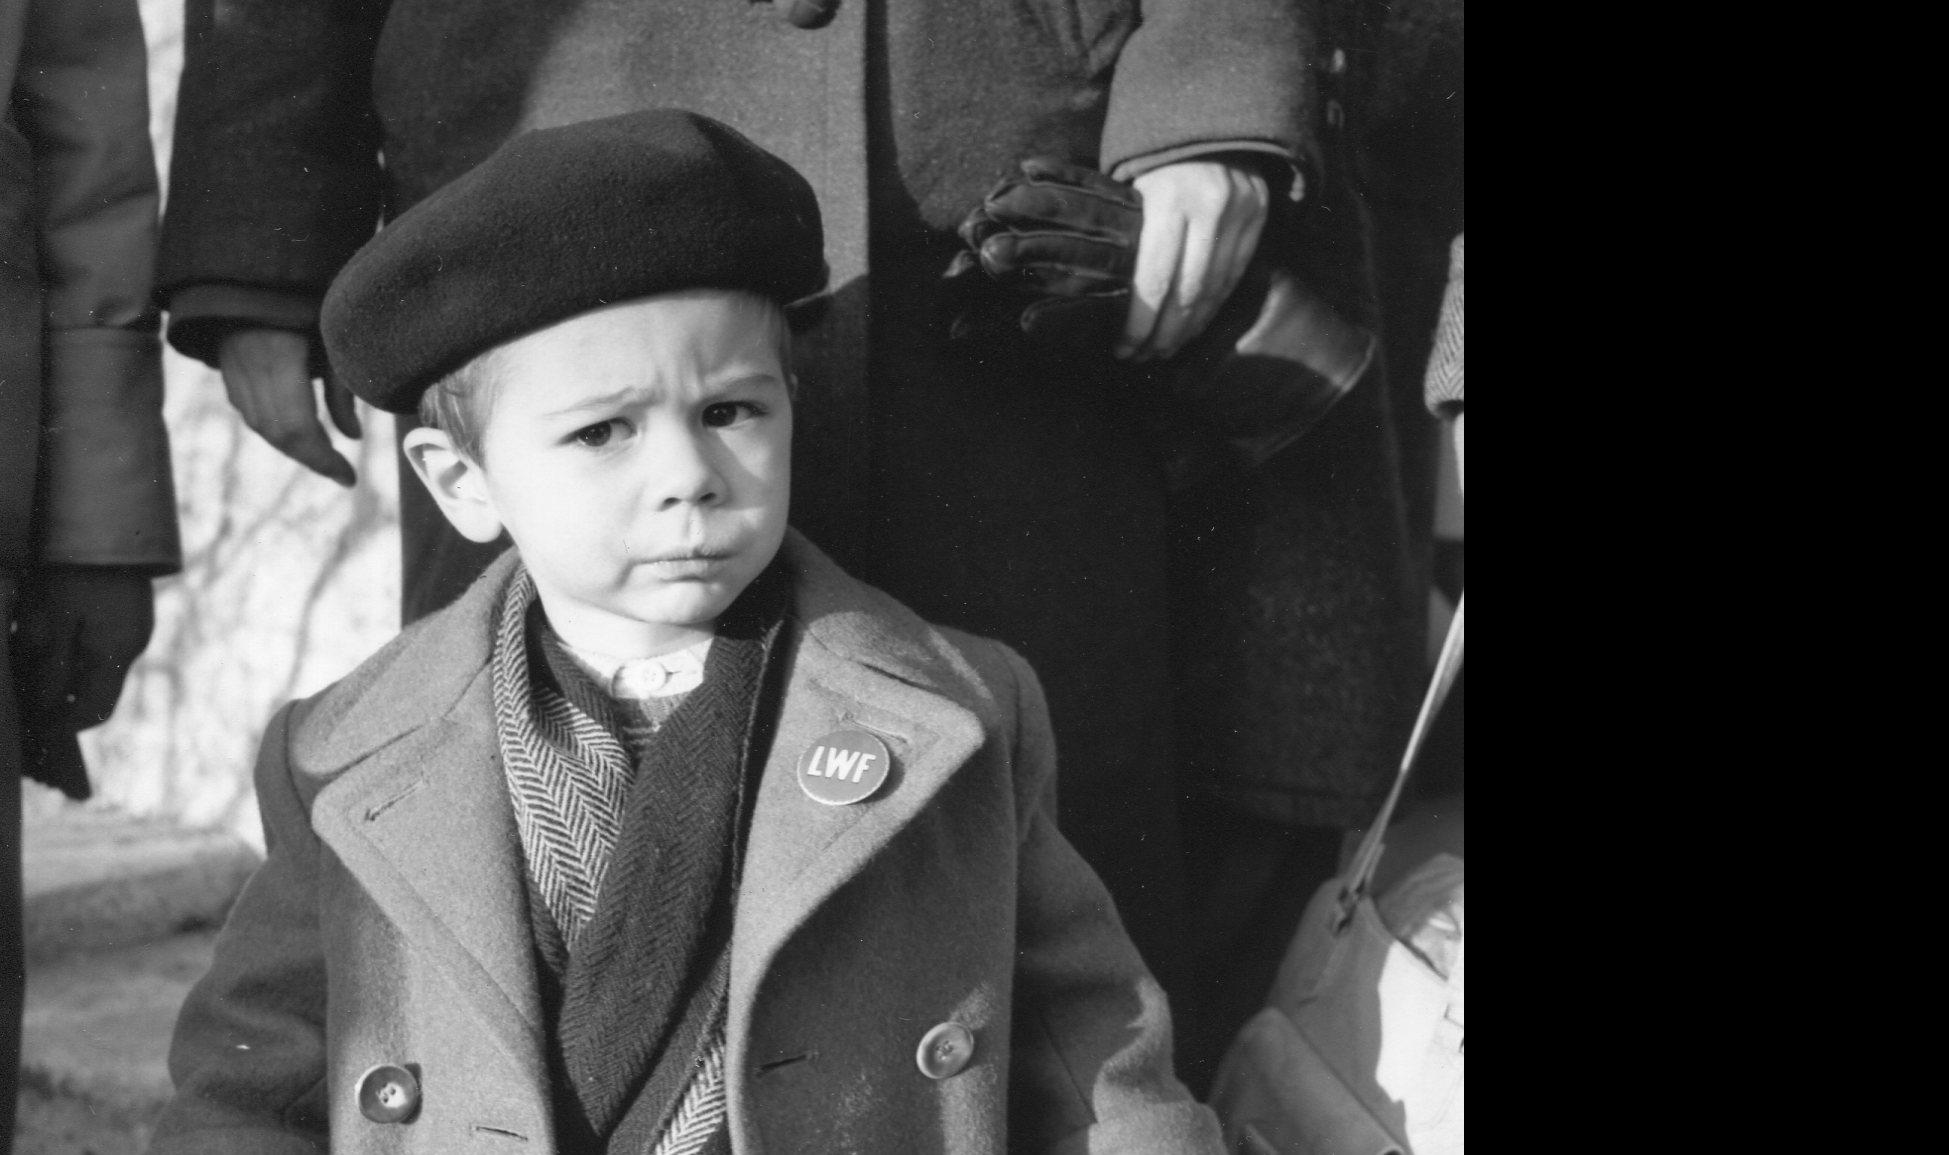 In the aftermath of the Second World War, the LWF supported thousands of displaced people in Europe. The young boy wearing an LWF pin on his coat lapel represents those pushed to leave their homes and find refuge elsewhere. Photo: LWF Archives